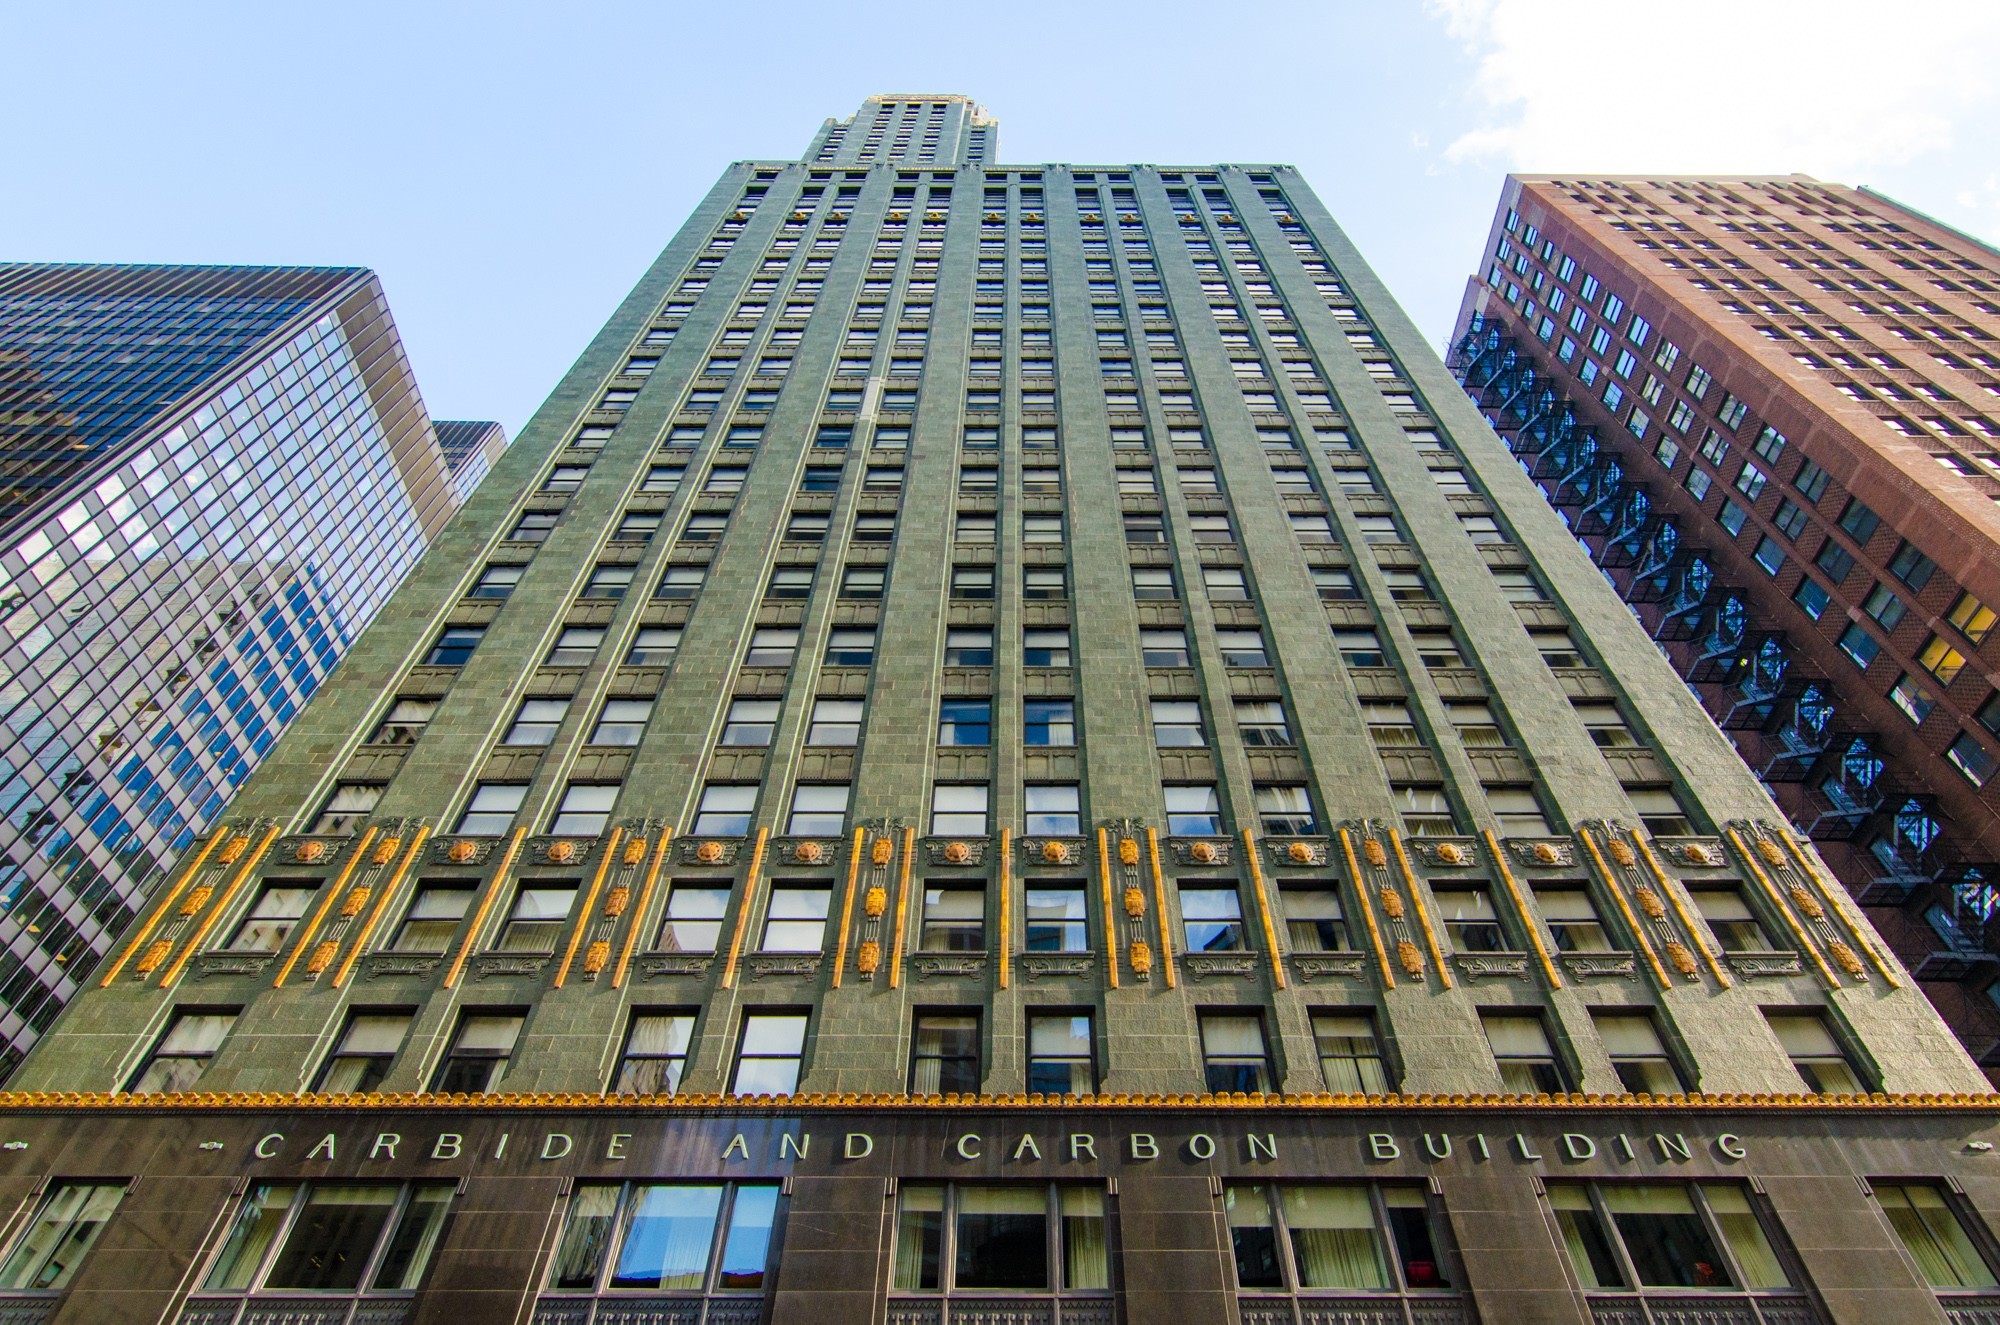 Carbide and Carbon Building · Buildings of Chicago · Chicago ...